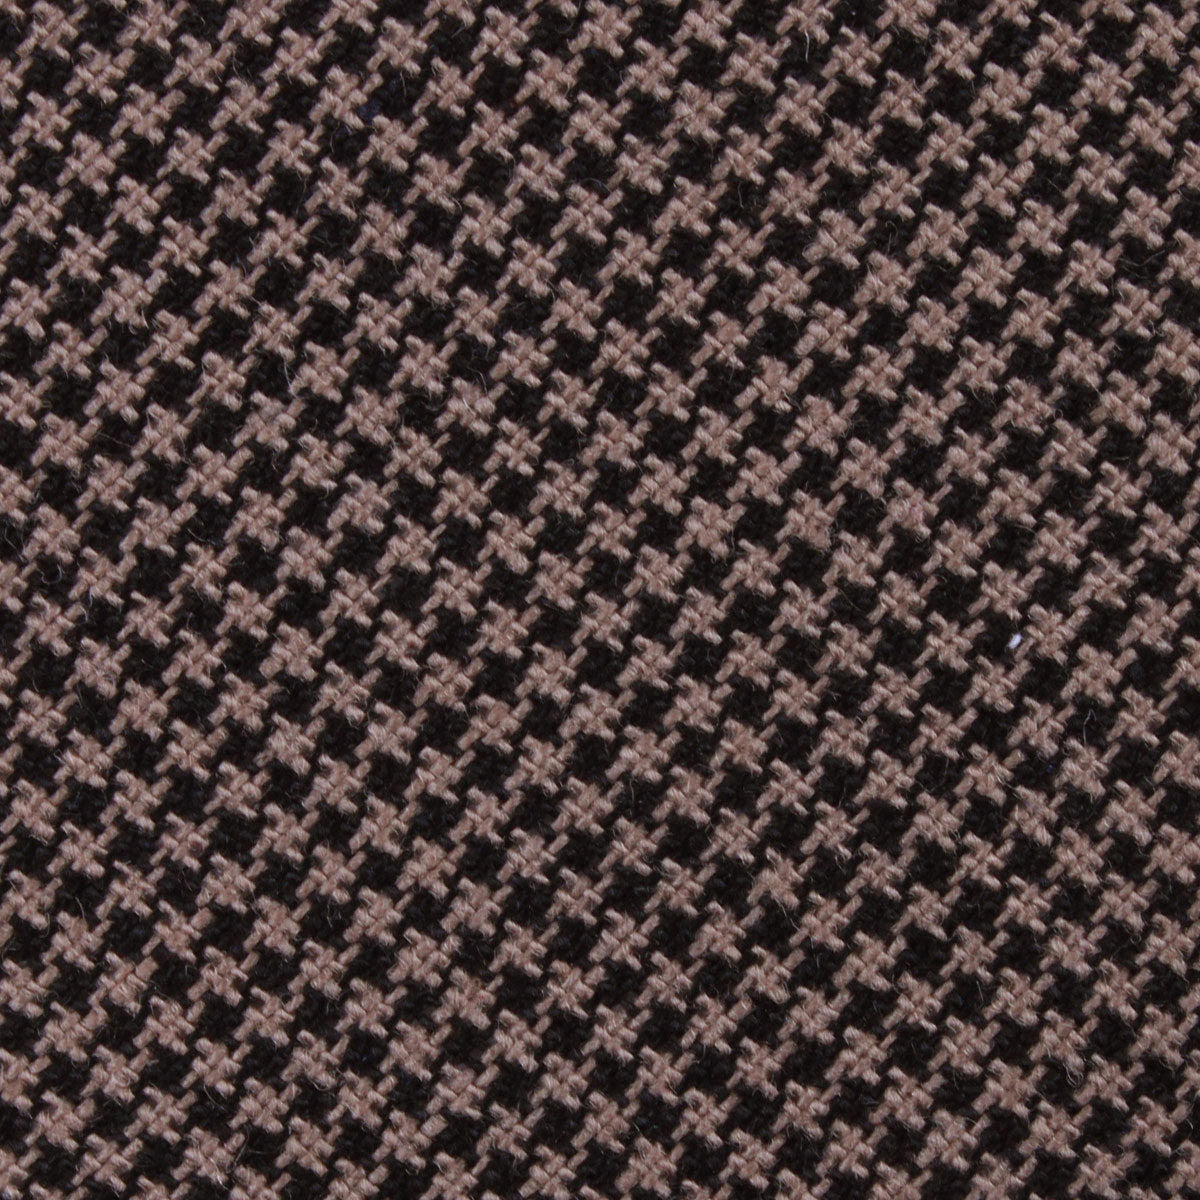 Madrid Brown Houndstooth Fabric Self Bowtie